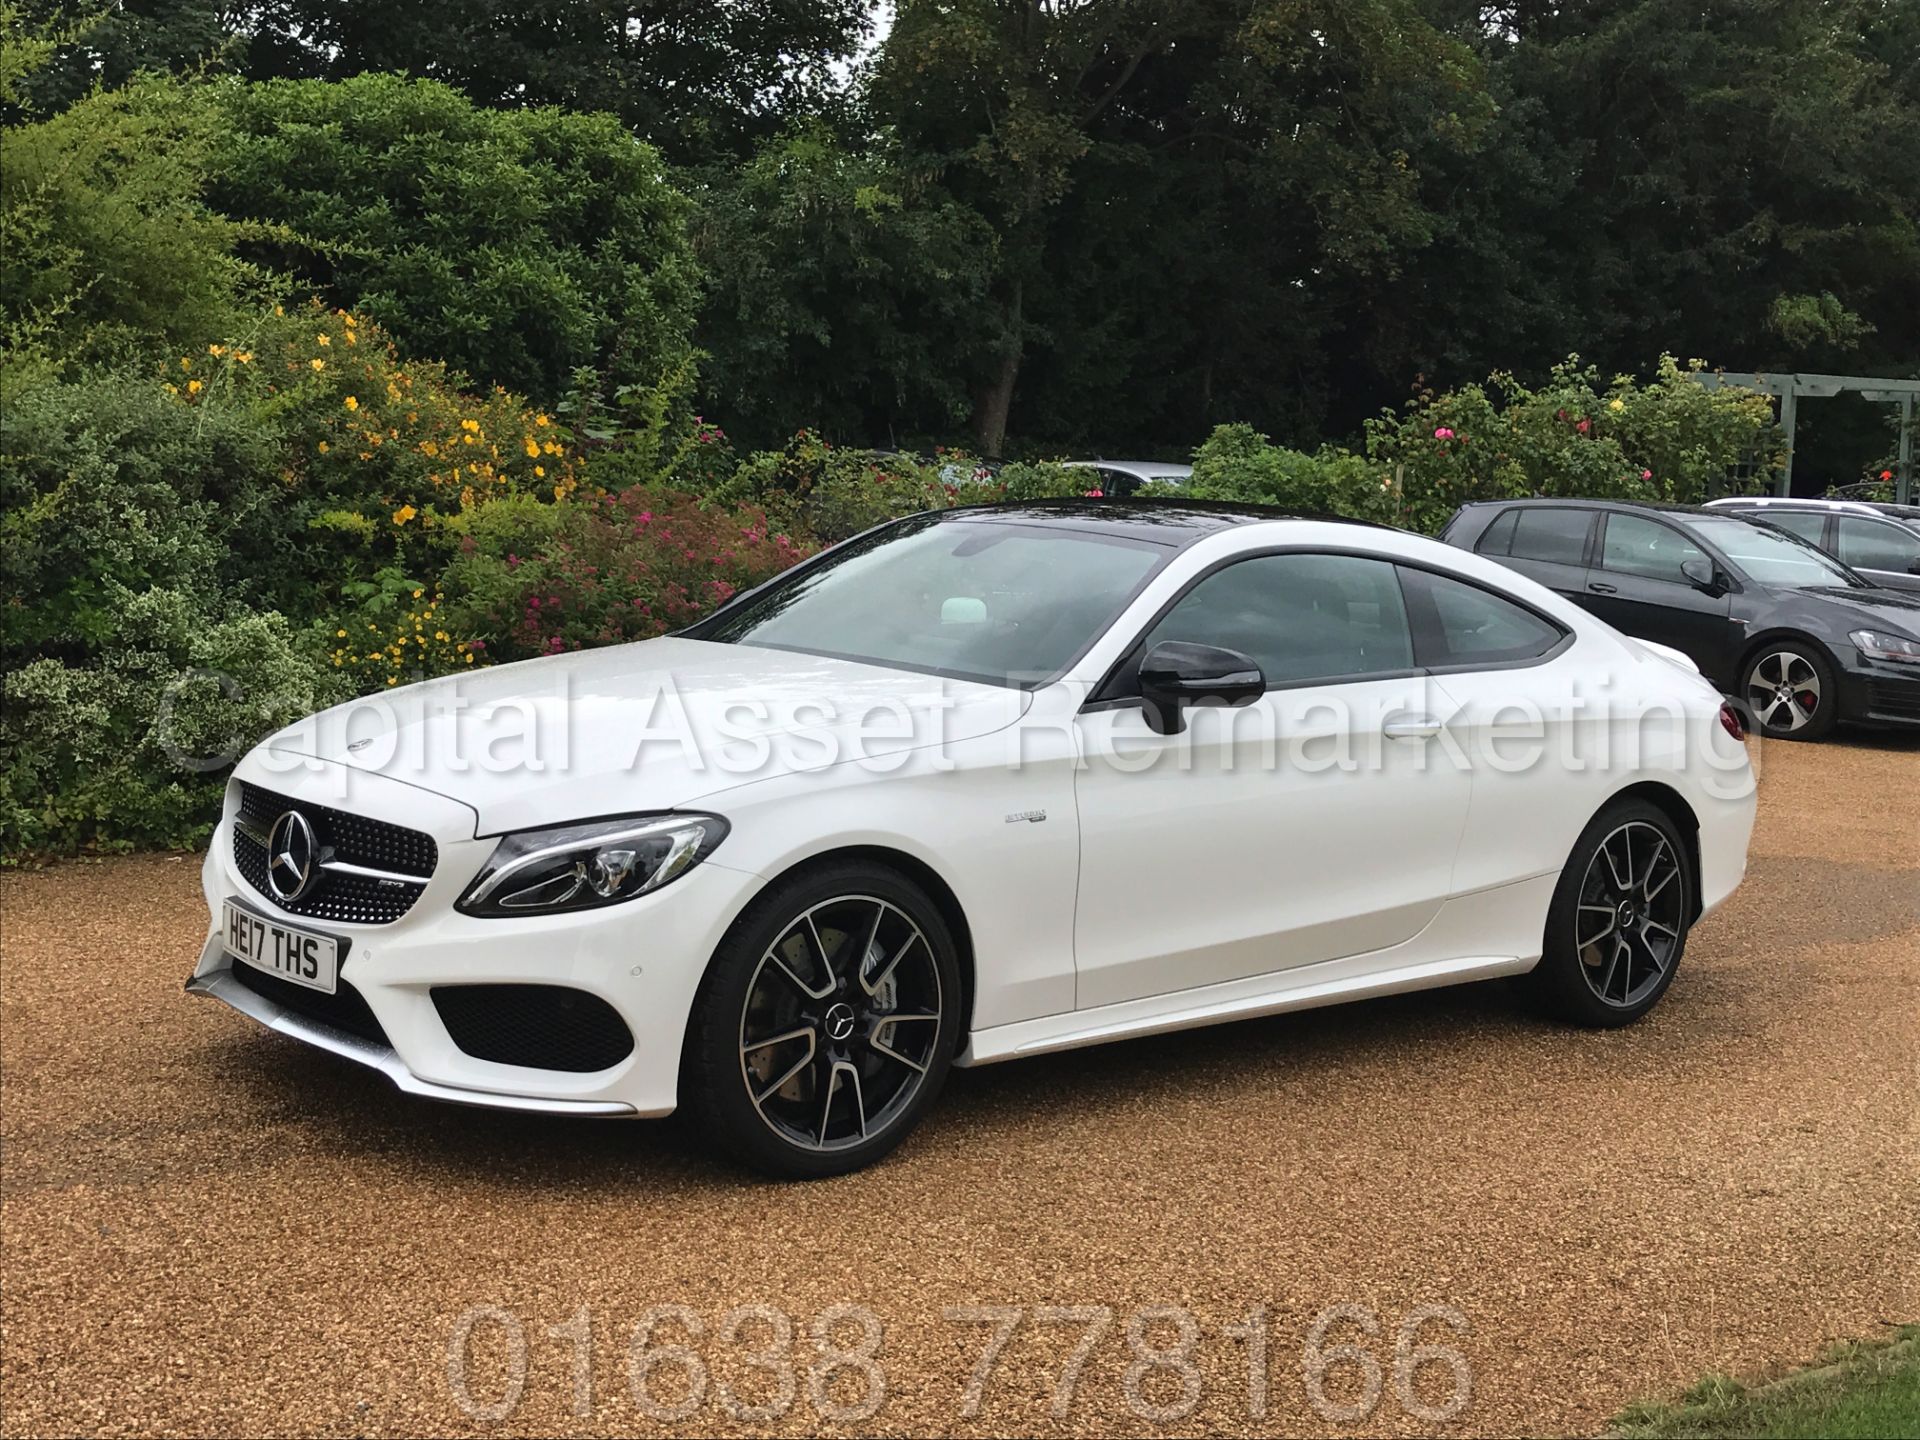 MEREDES-BENZ C43 AMG PREMIUM '4 MATIC' COUPE (2017) '9-G AUTO - LEATHER - SAT NAV' **FULLY LOADED** - Image 10 of 57